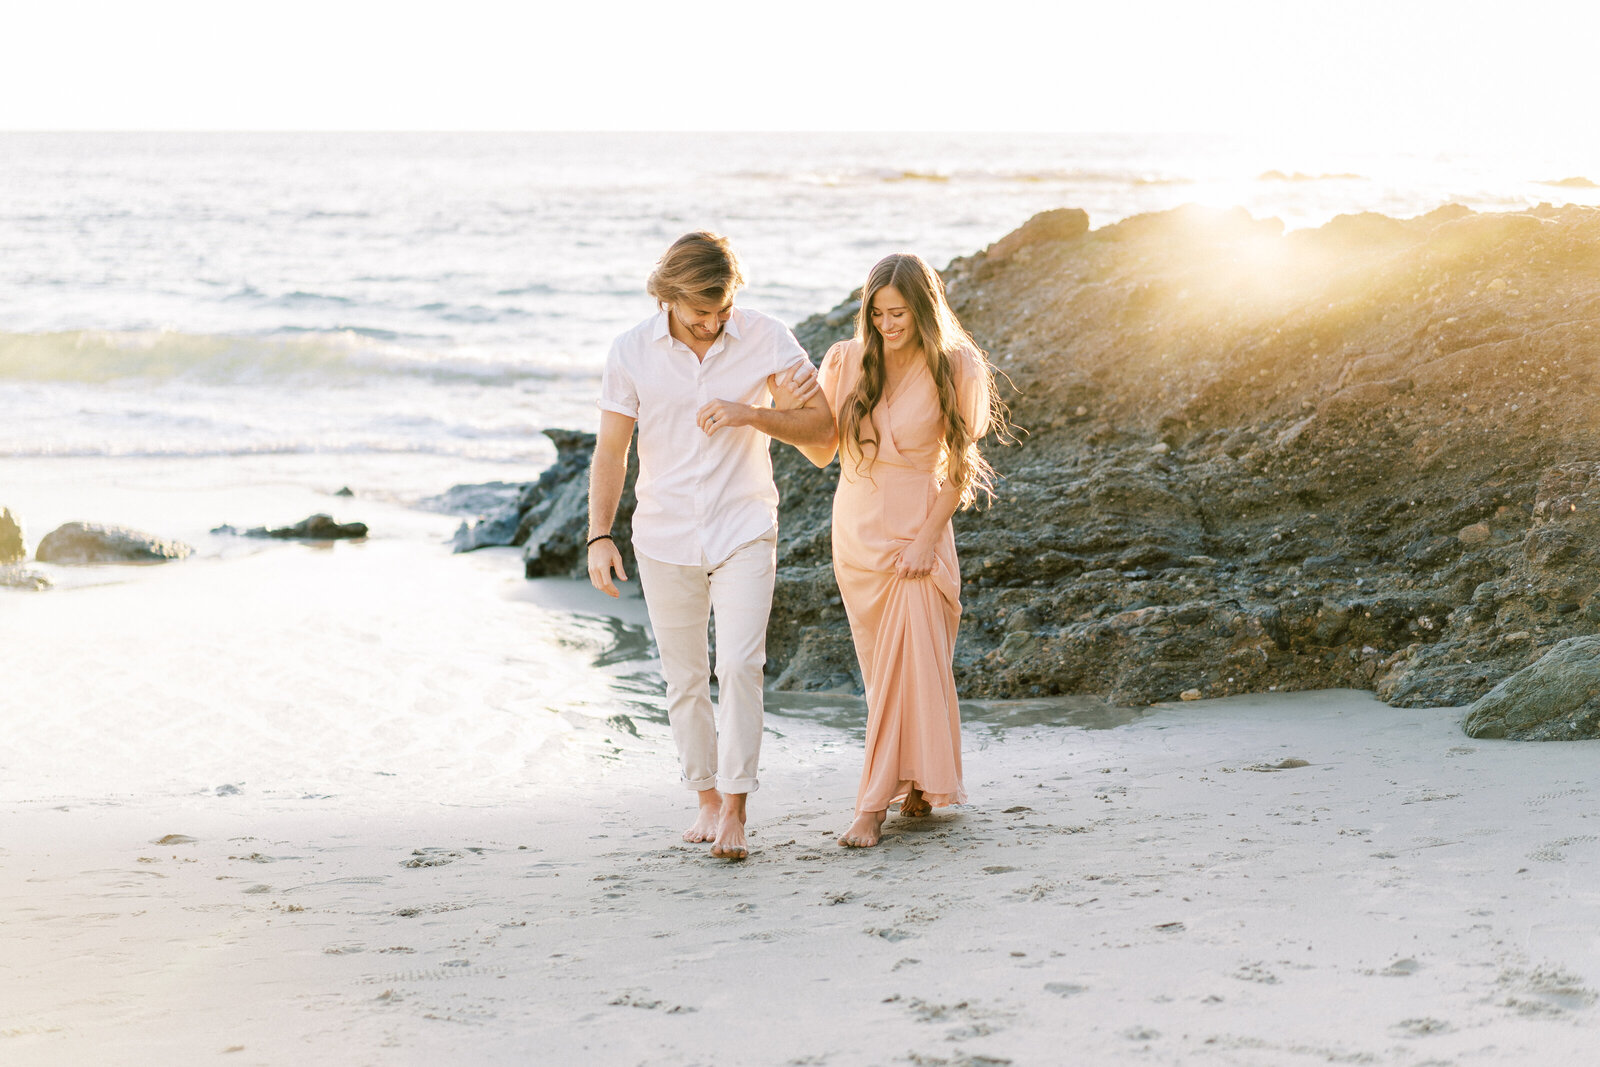 Portrait of a man in a white shirt and khakis locked in arm with a woman in a pink dress on the sand at the beach.